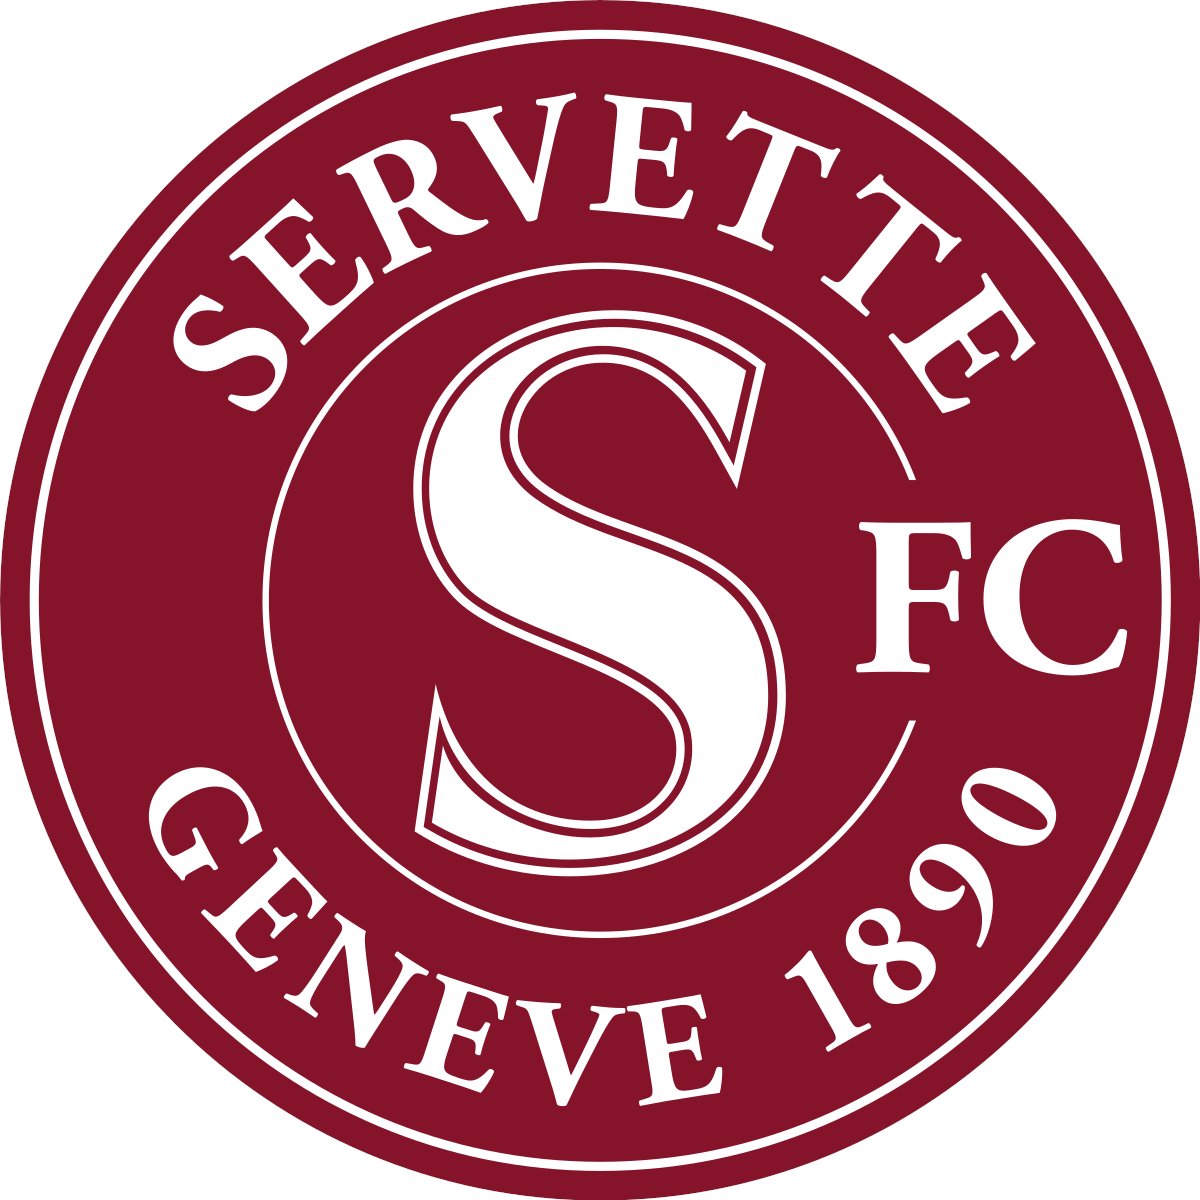 EVOLUTIONCatenaccio however did not originate in Italy but in Switzerland. Austrian professional Karl Rappan was assigned to take over Swiss local league team Servette.